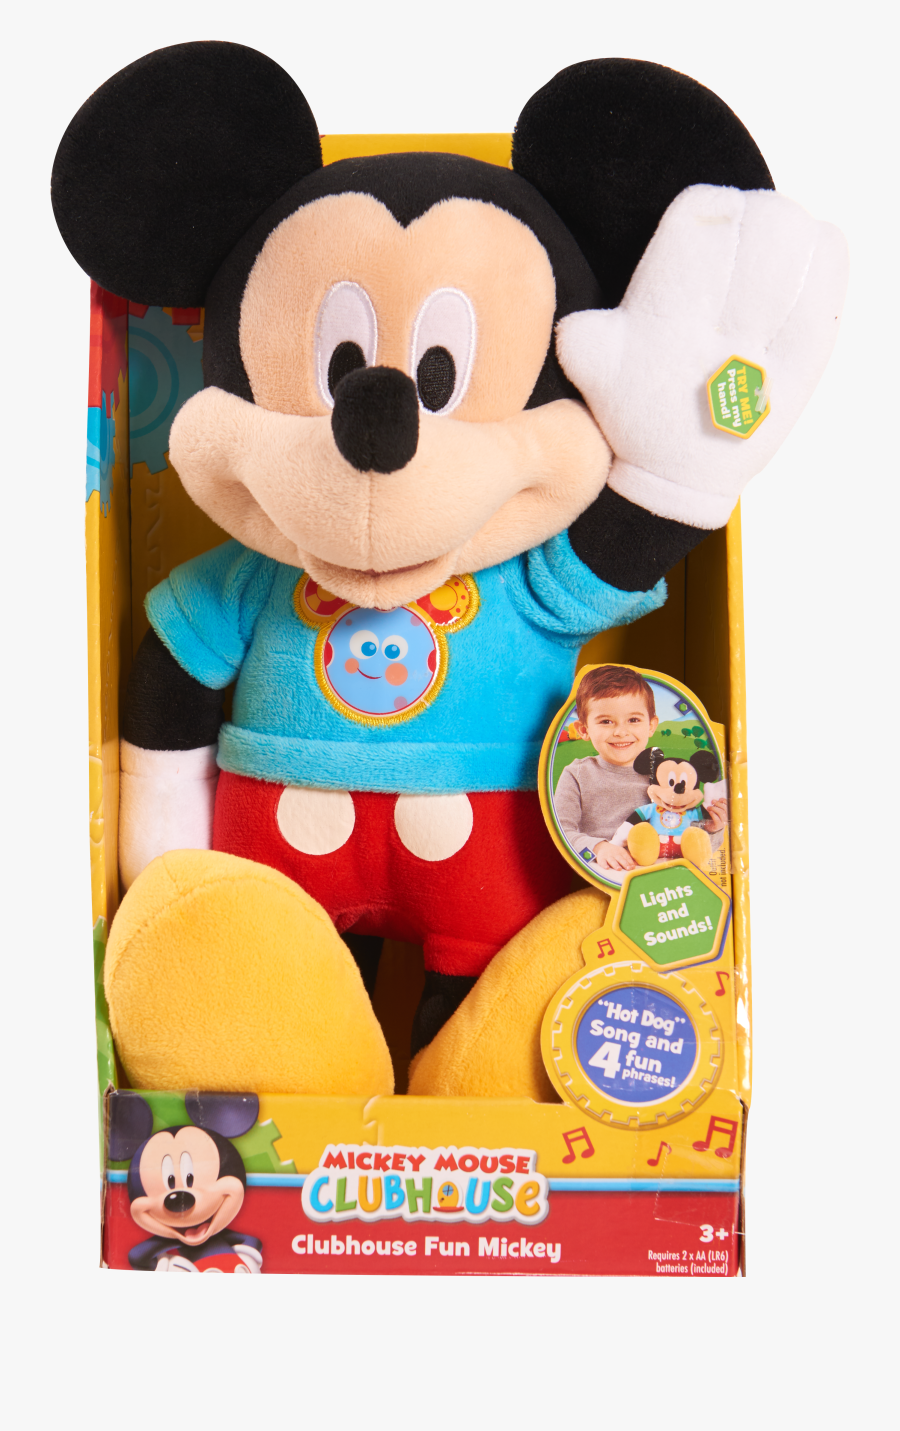 Mickey Mouse Clubhouse Fun Mickey - Plush Mickey Mouse Clubhouse, Transparent Clipart